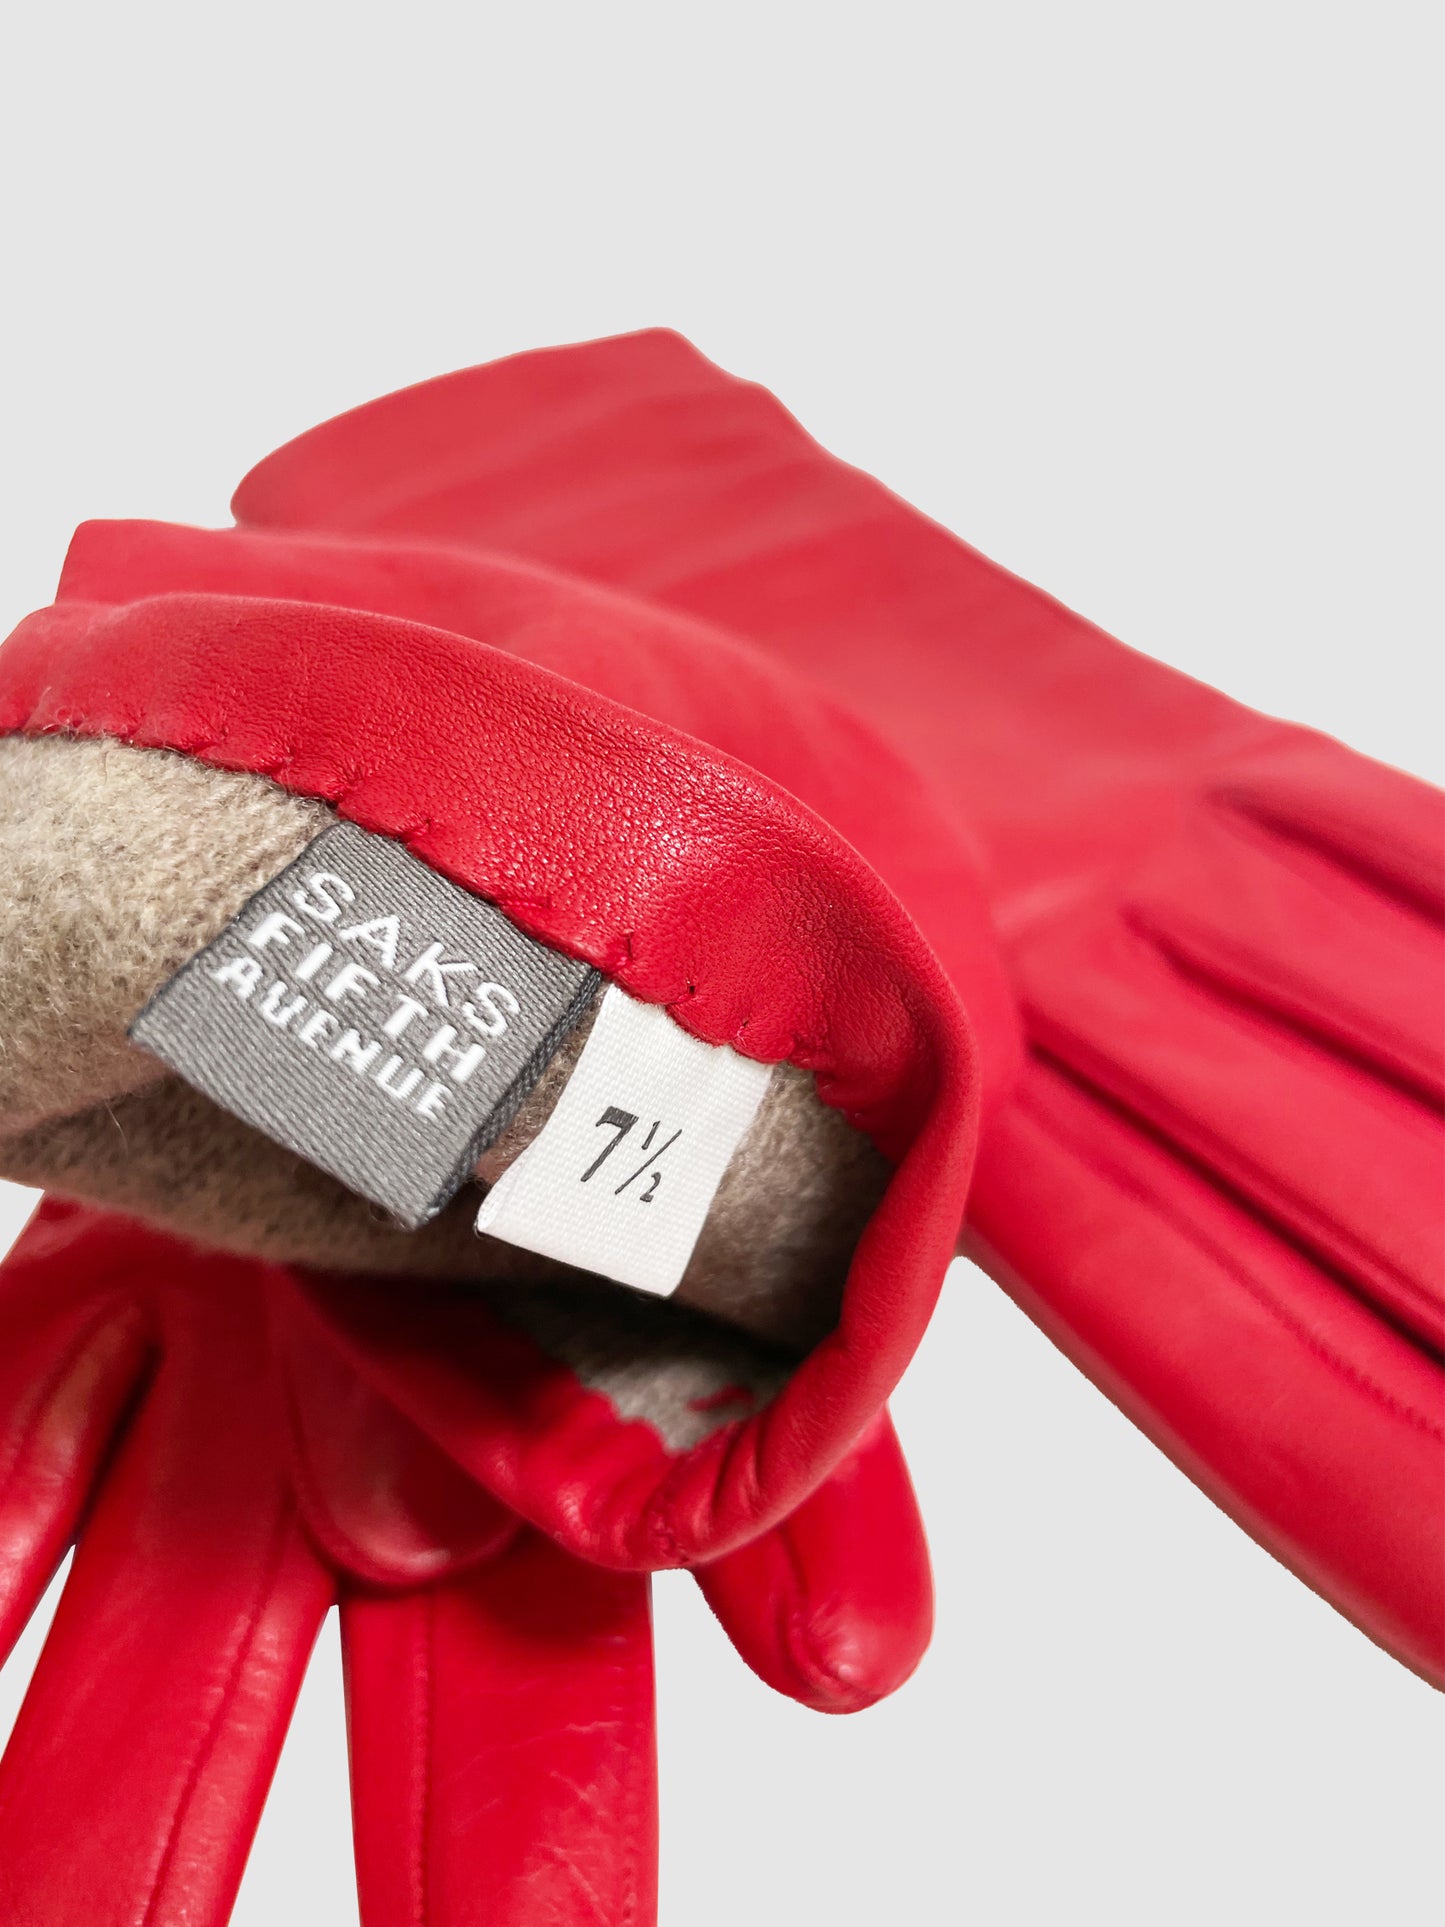 Saks Fifth Avenue Red Leather Gloves - Size 7.5